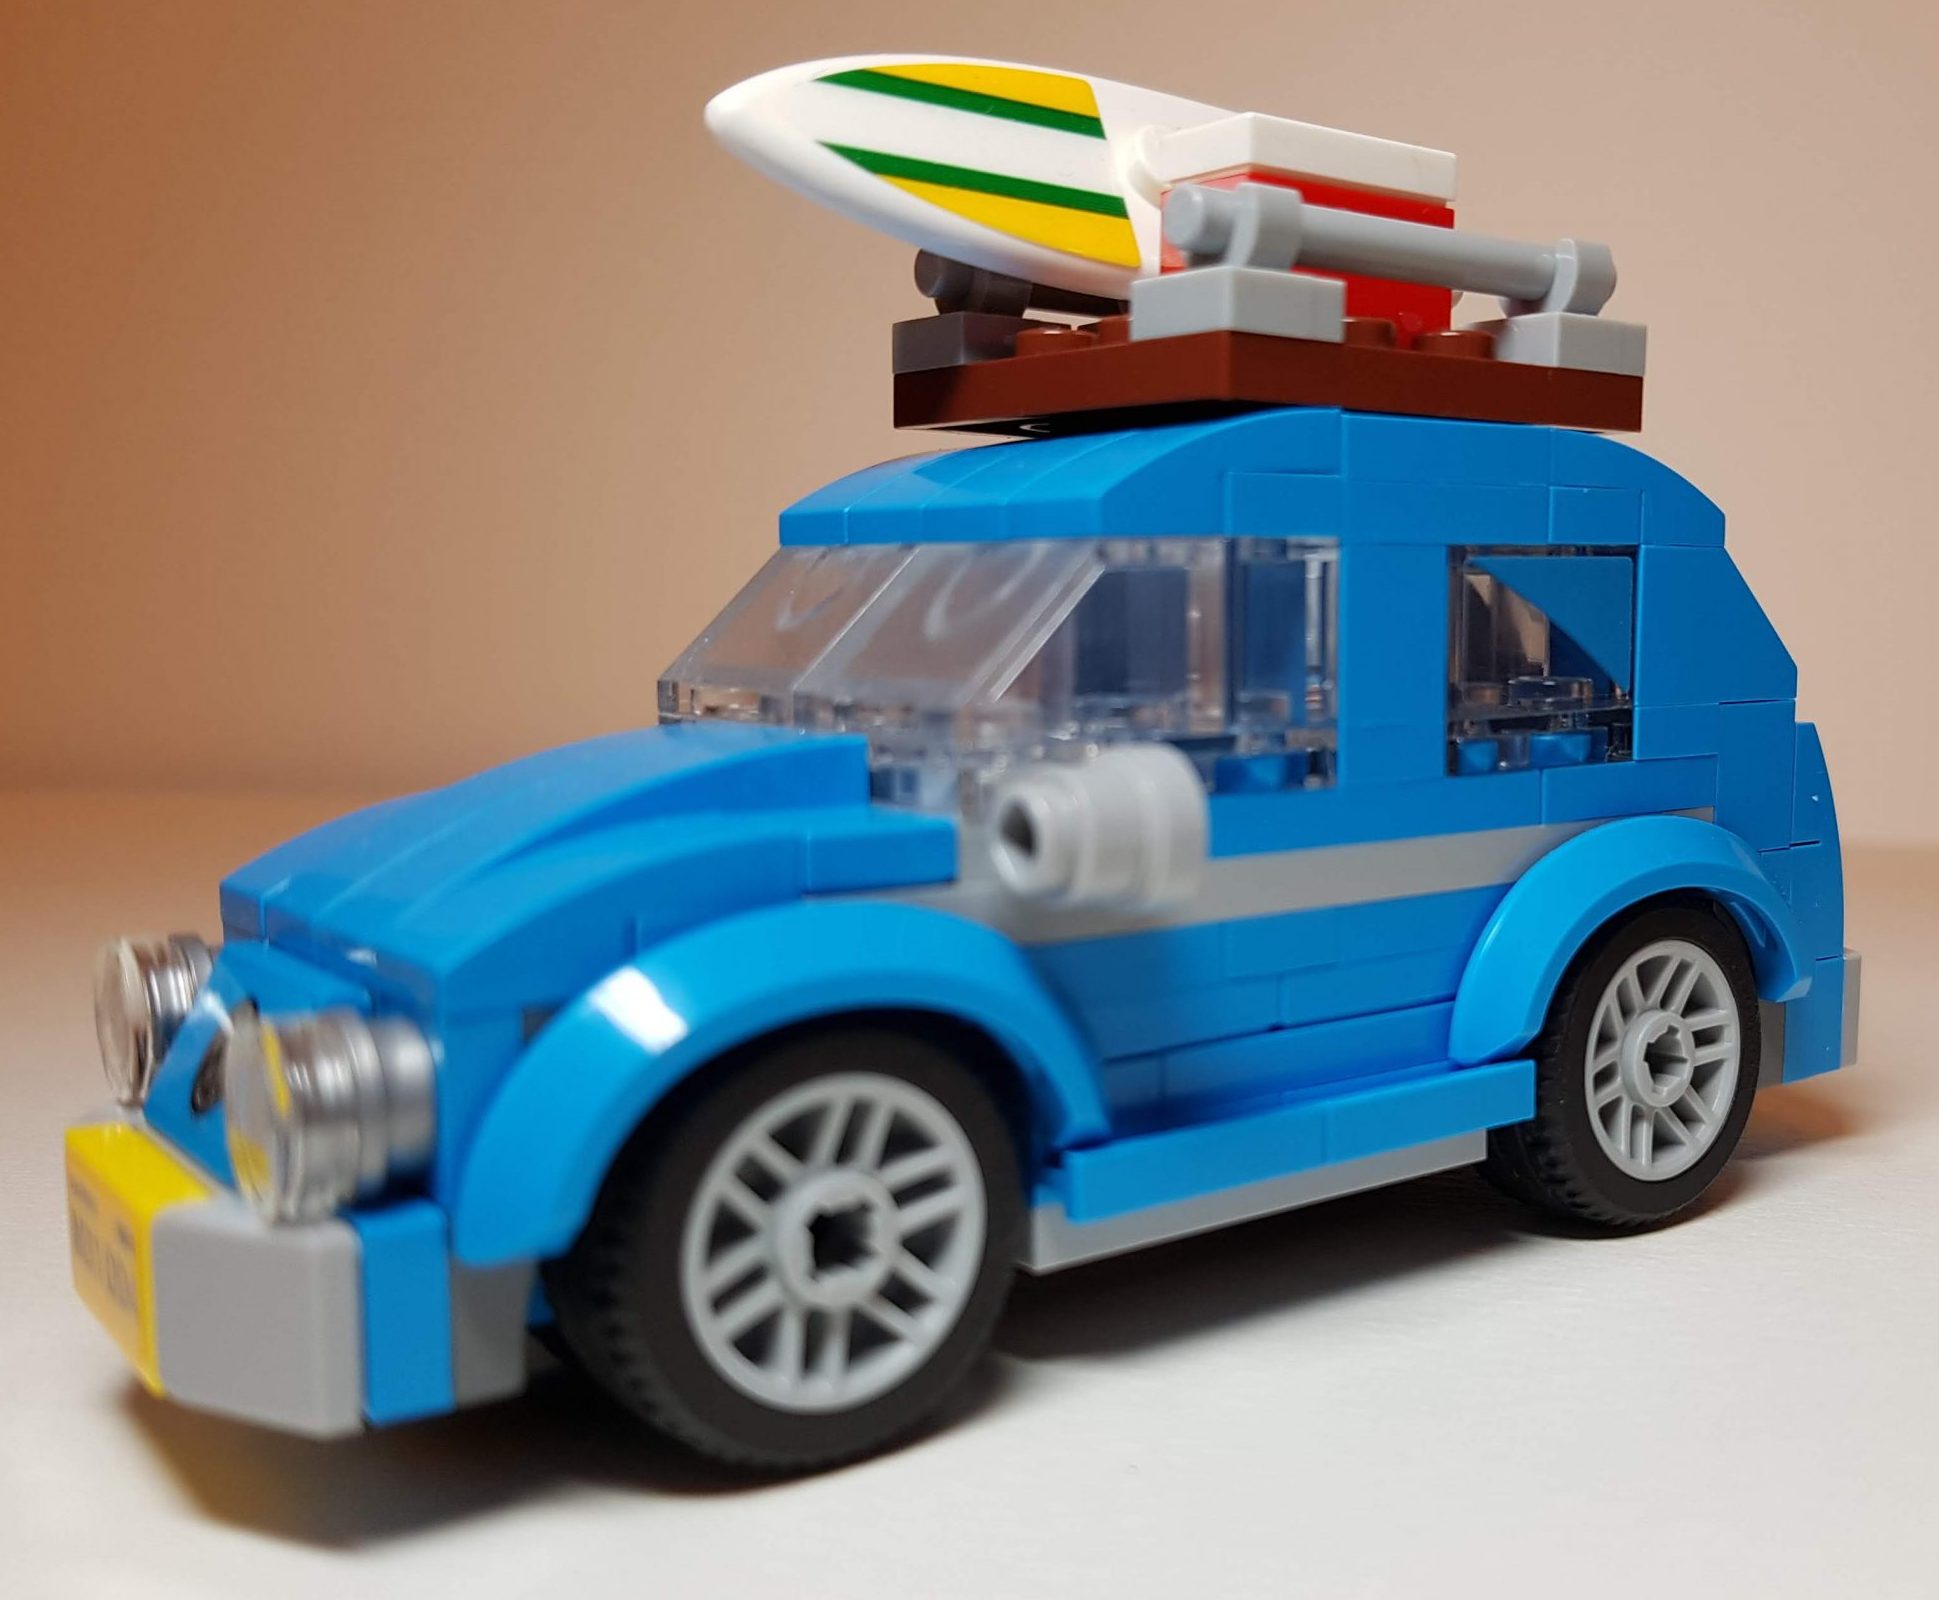 Mini VW Beetle (LEGO 40252) - View 2 - Built By Wright Built